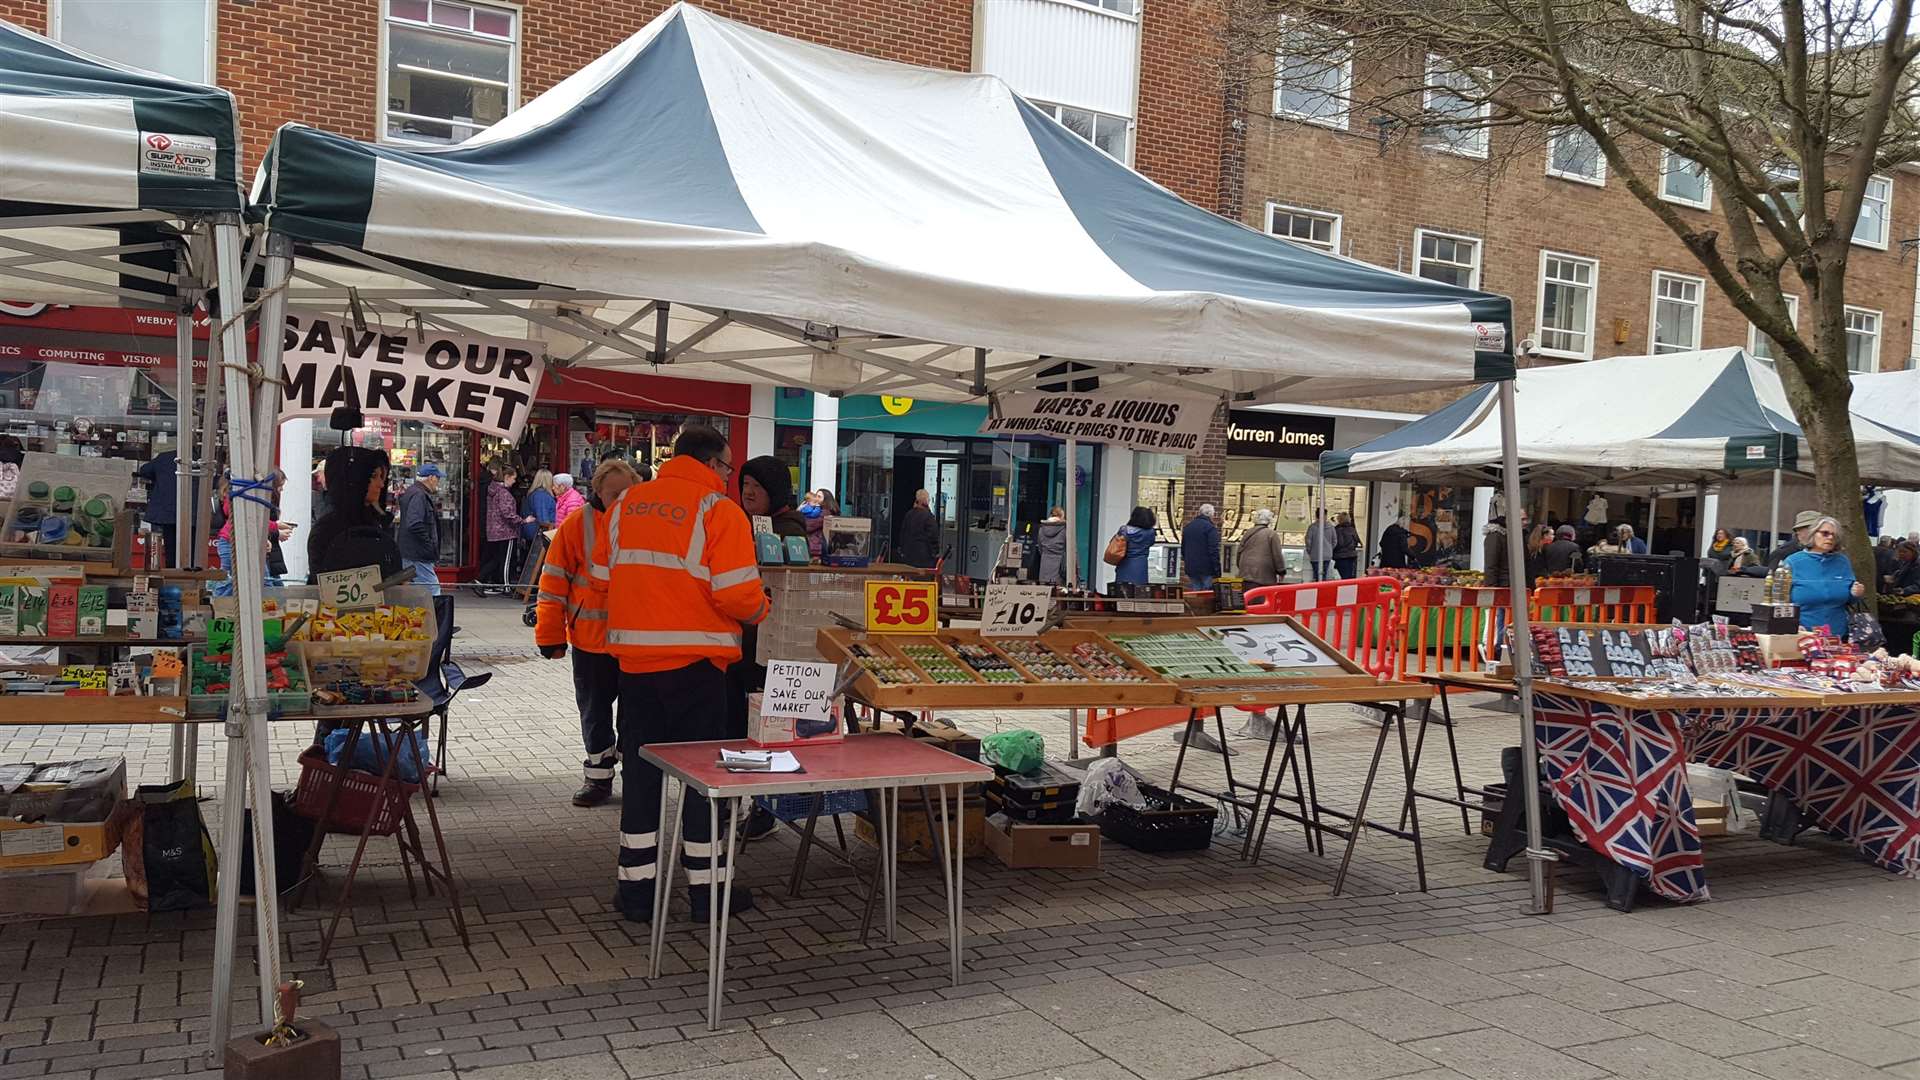 A petition had been launched to save the market in Canterbury city centre